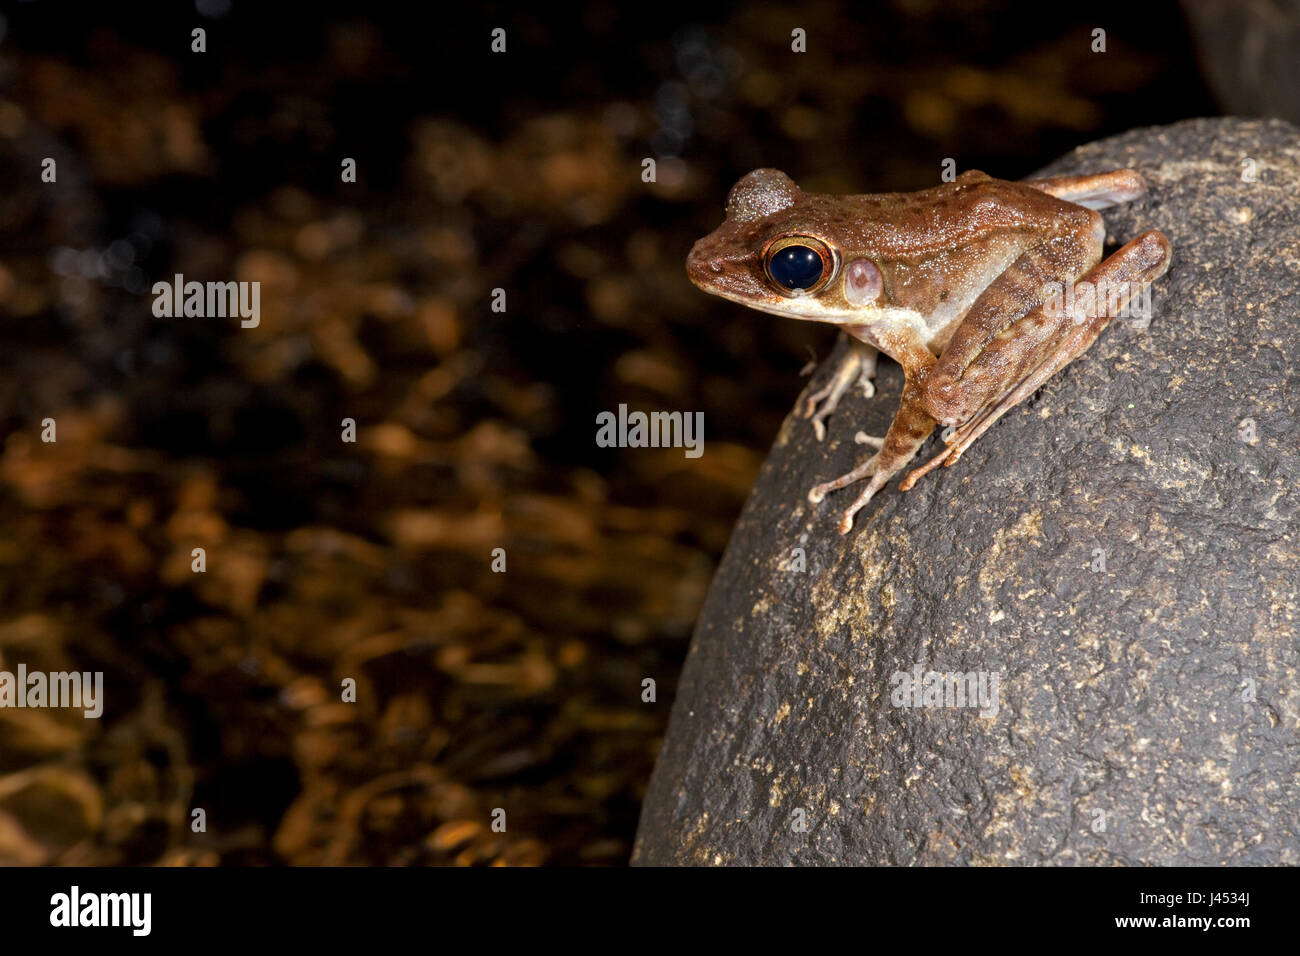 photo of a Northern torrent frog on a rock Stock Photo